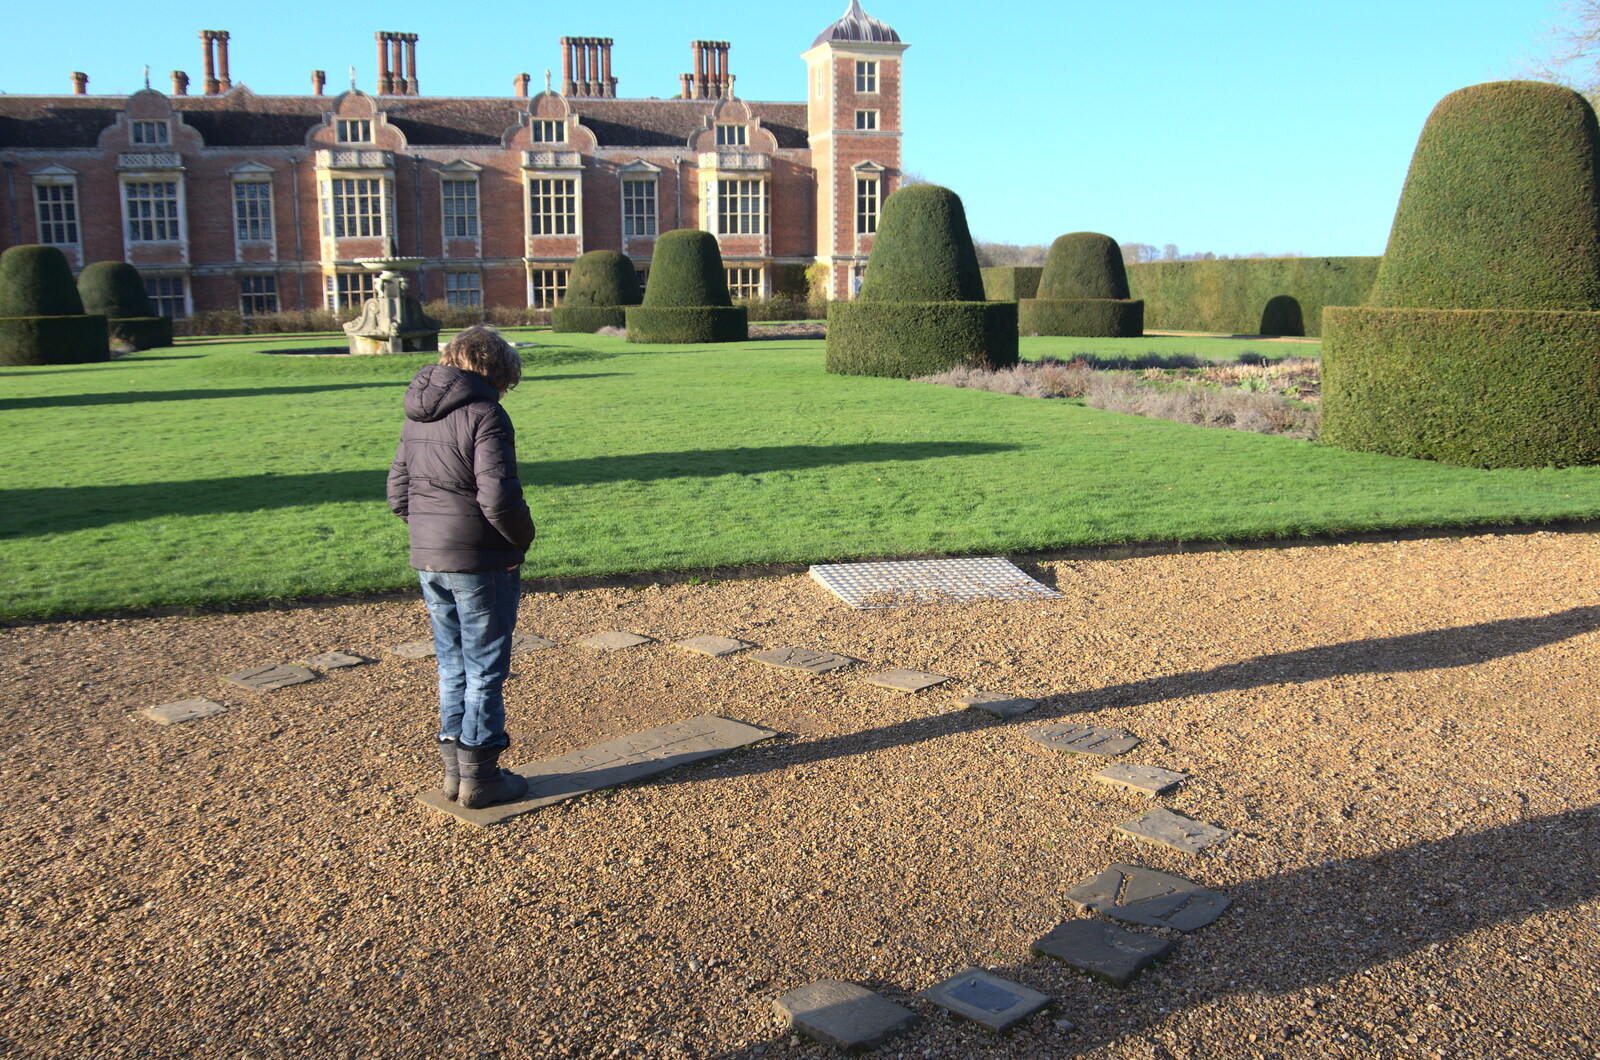 Fred becomes the gnomon in a human sundial from A Visit to Blickling Hall, Aylsham, Norfolk - 9th January 2022